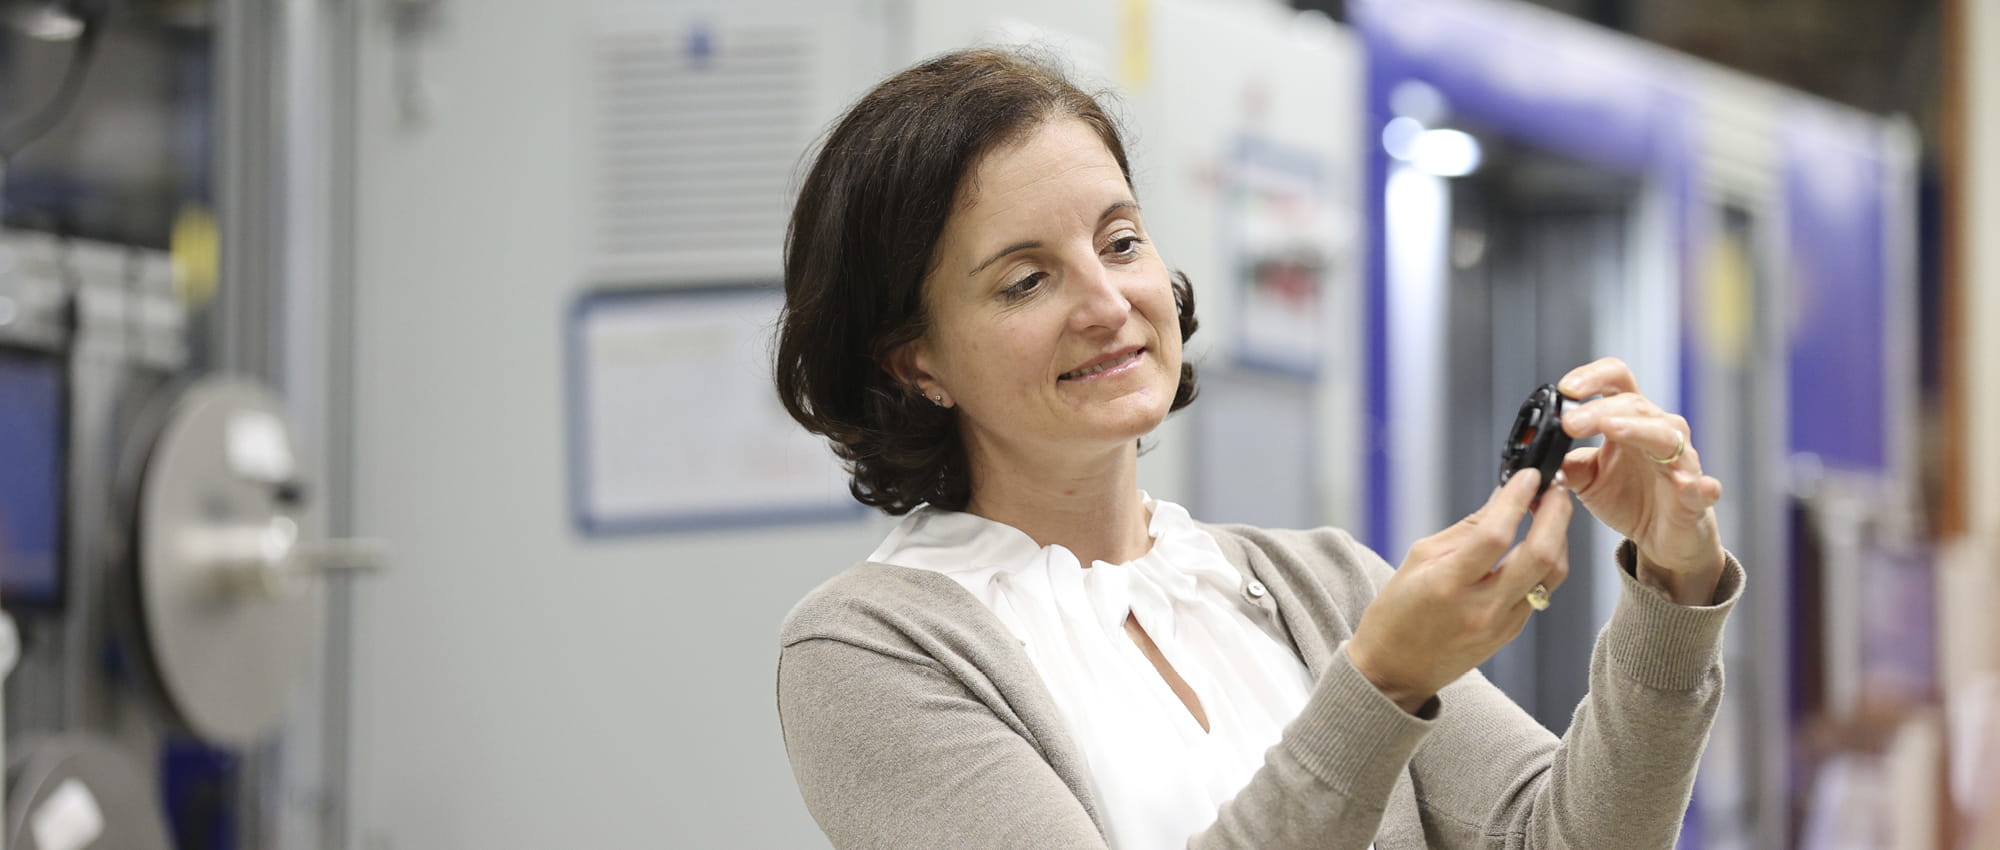 Tanja Heislitz, Technical Director E-Mobility at Freudenberg Sealing Technologies, holds a DIAvent plastic part in her hands and looks at it.